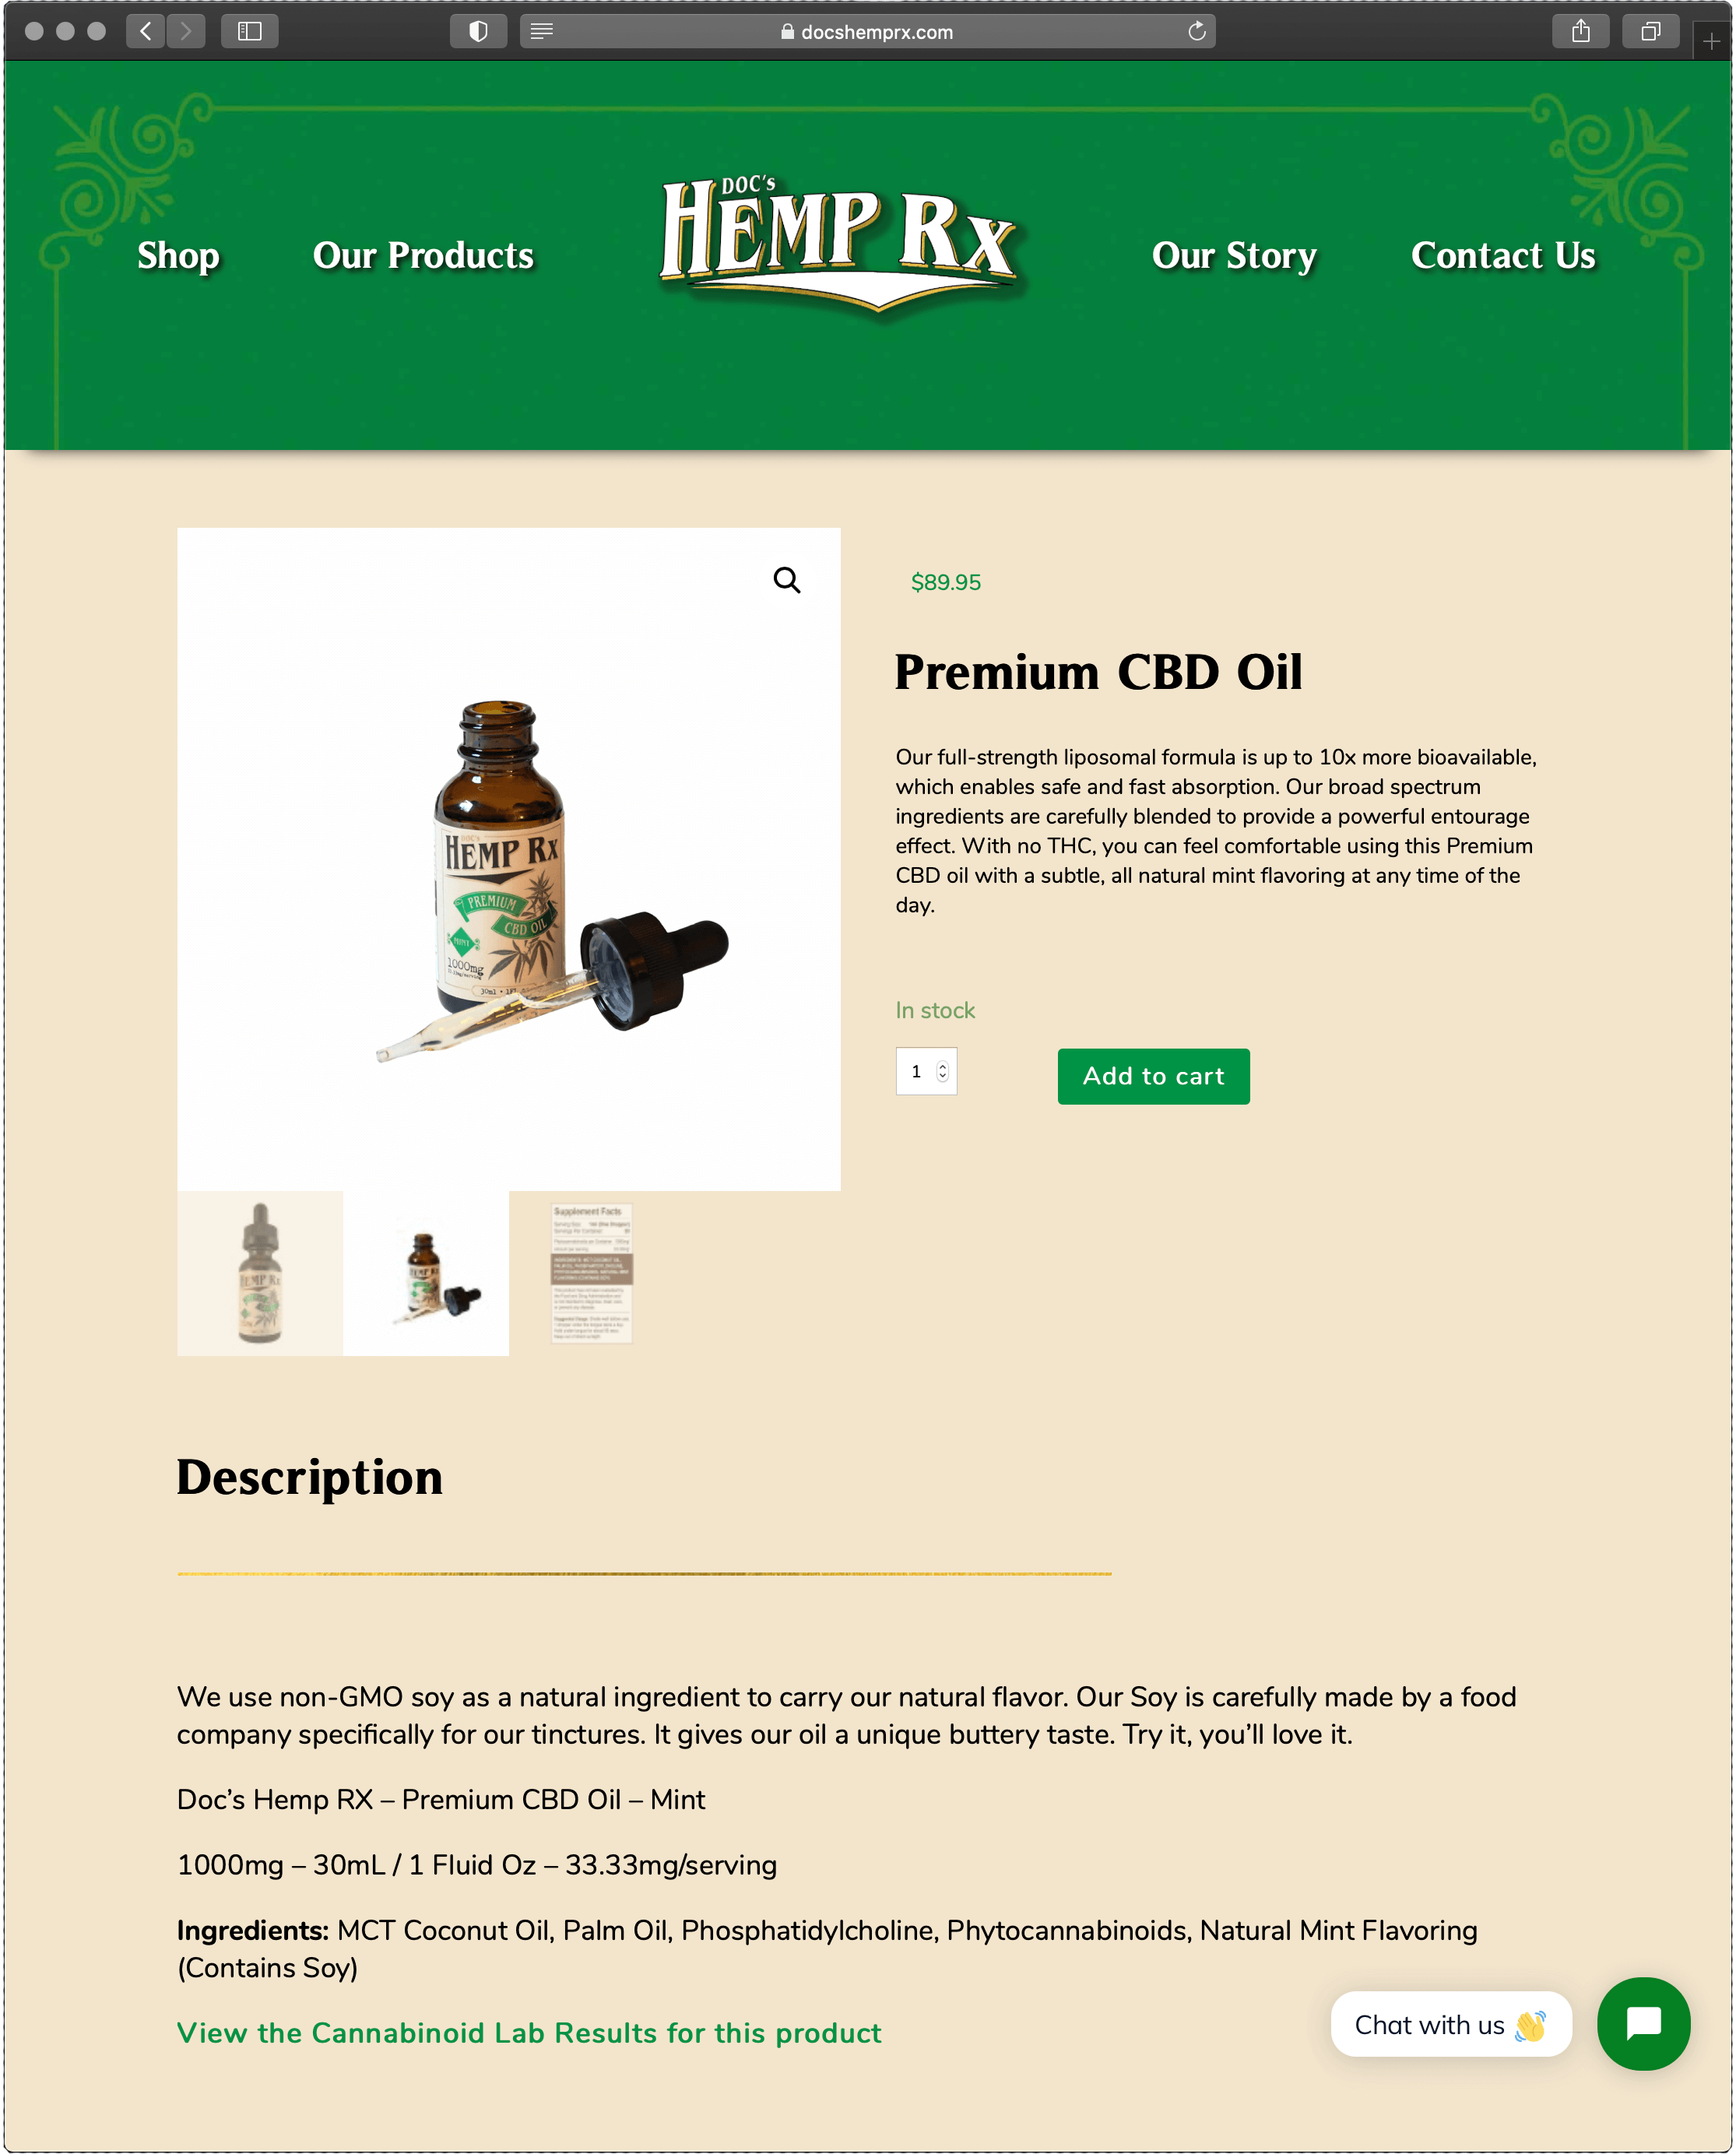 snapshot of product page on Doc's Hemp RX site